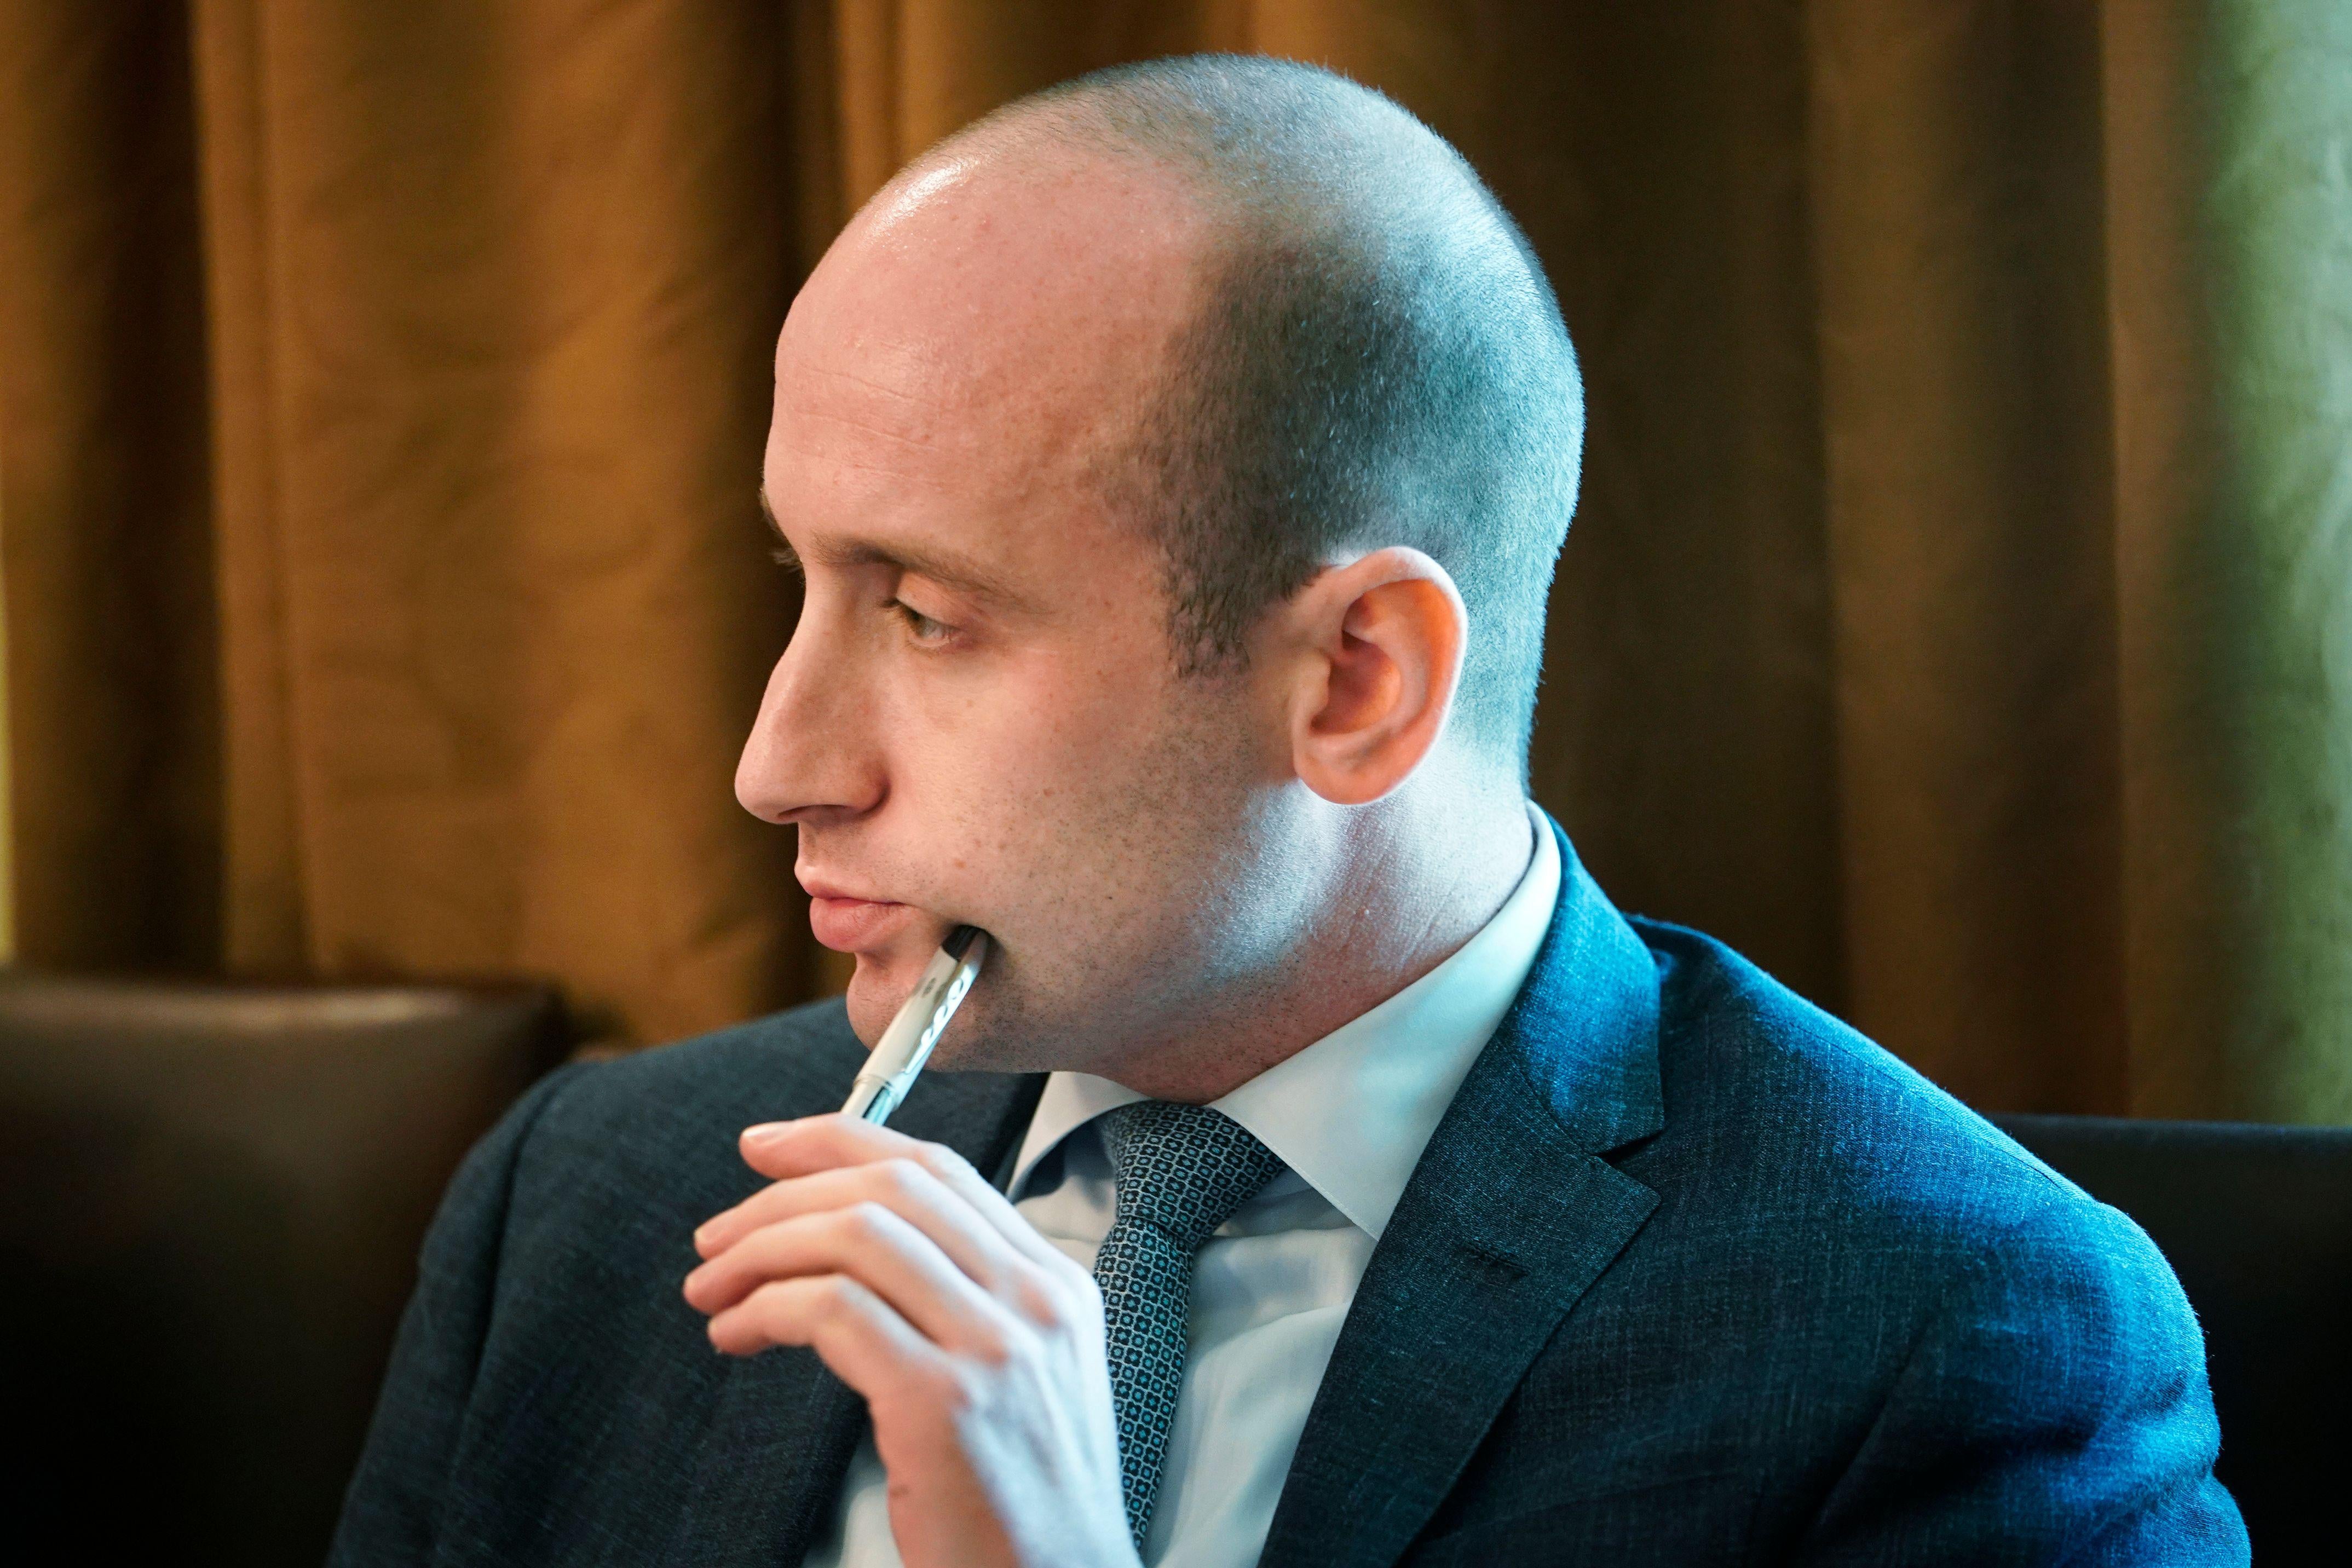 Stephen Miller attends a Cabinet meeting in the White House on August 16, 2018 in Washington, D.C. 